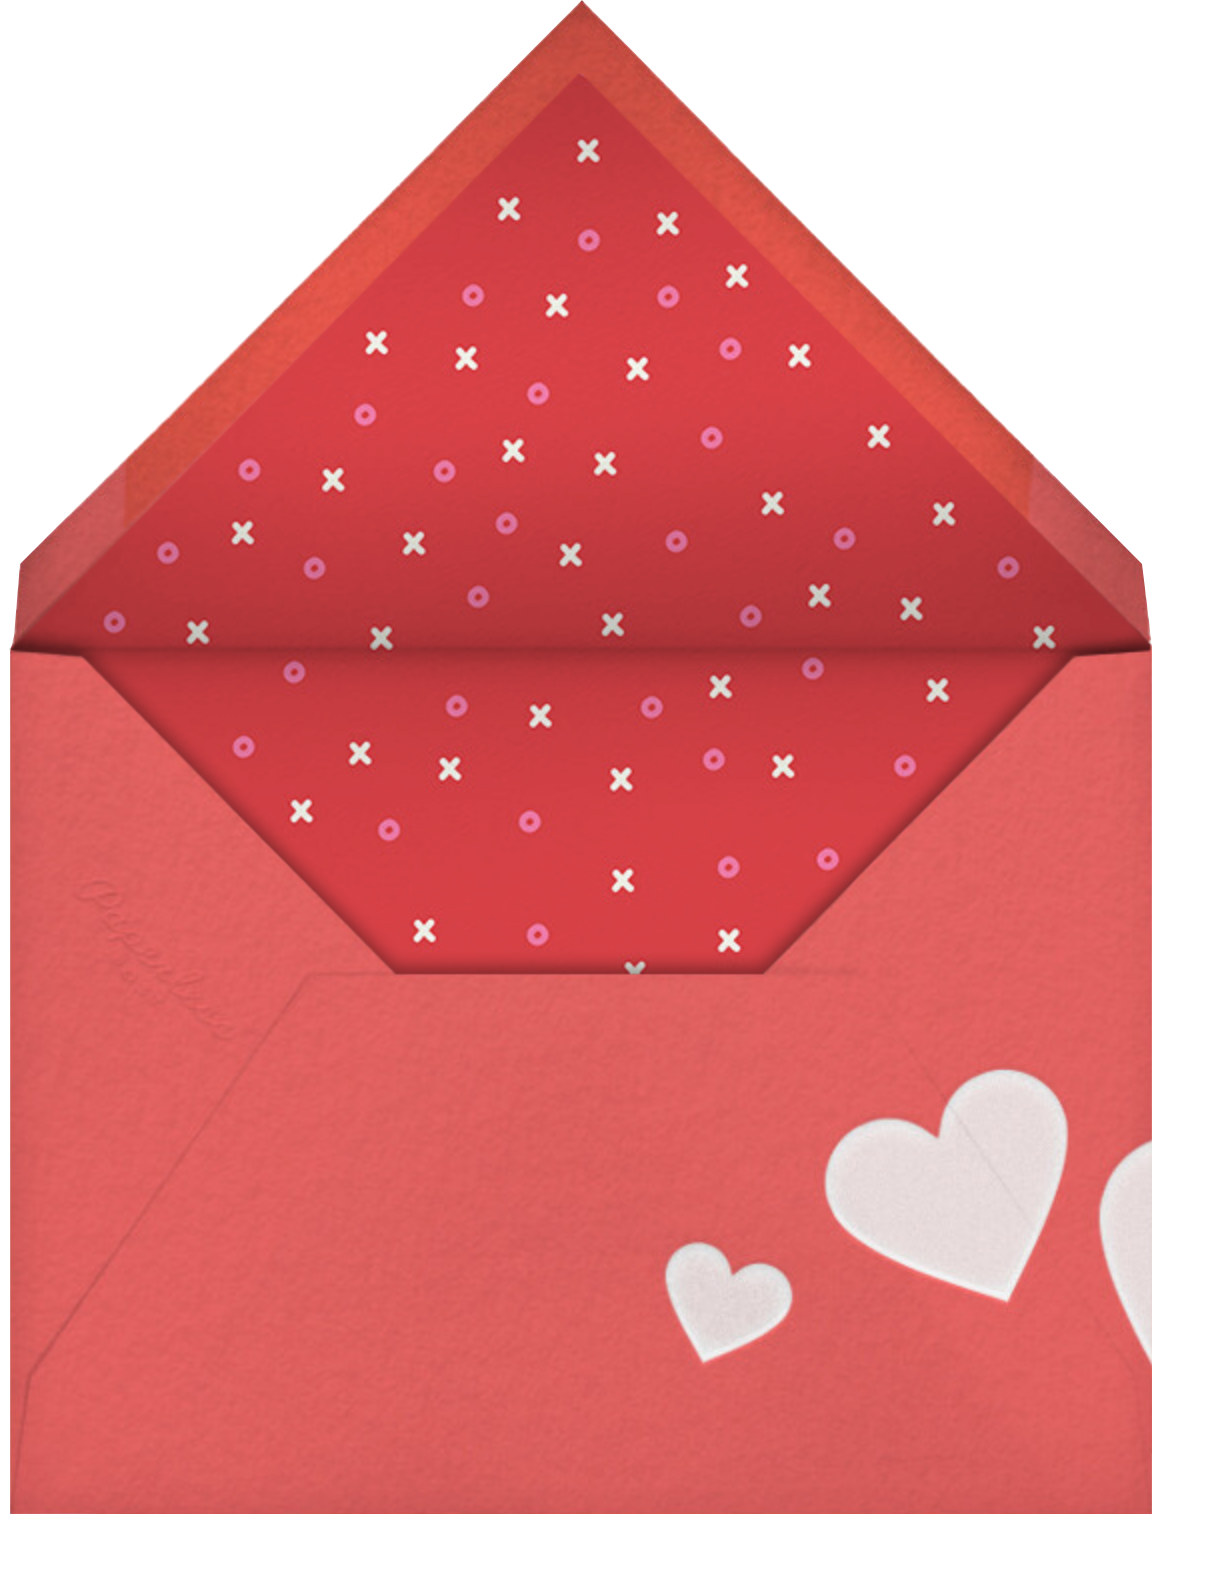 Hogs and Kisses - Paperless Post - Envelope